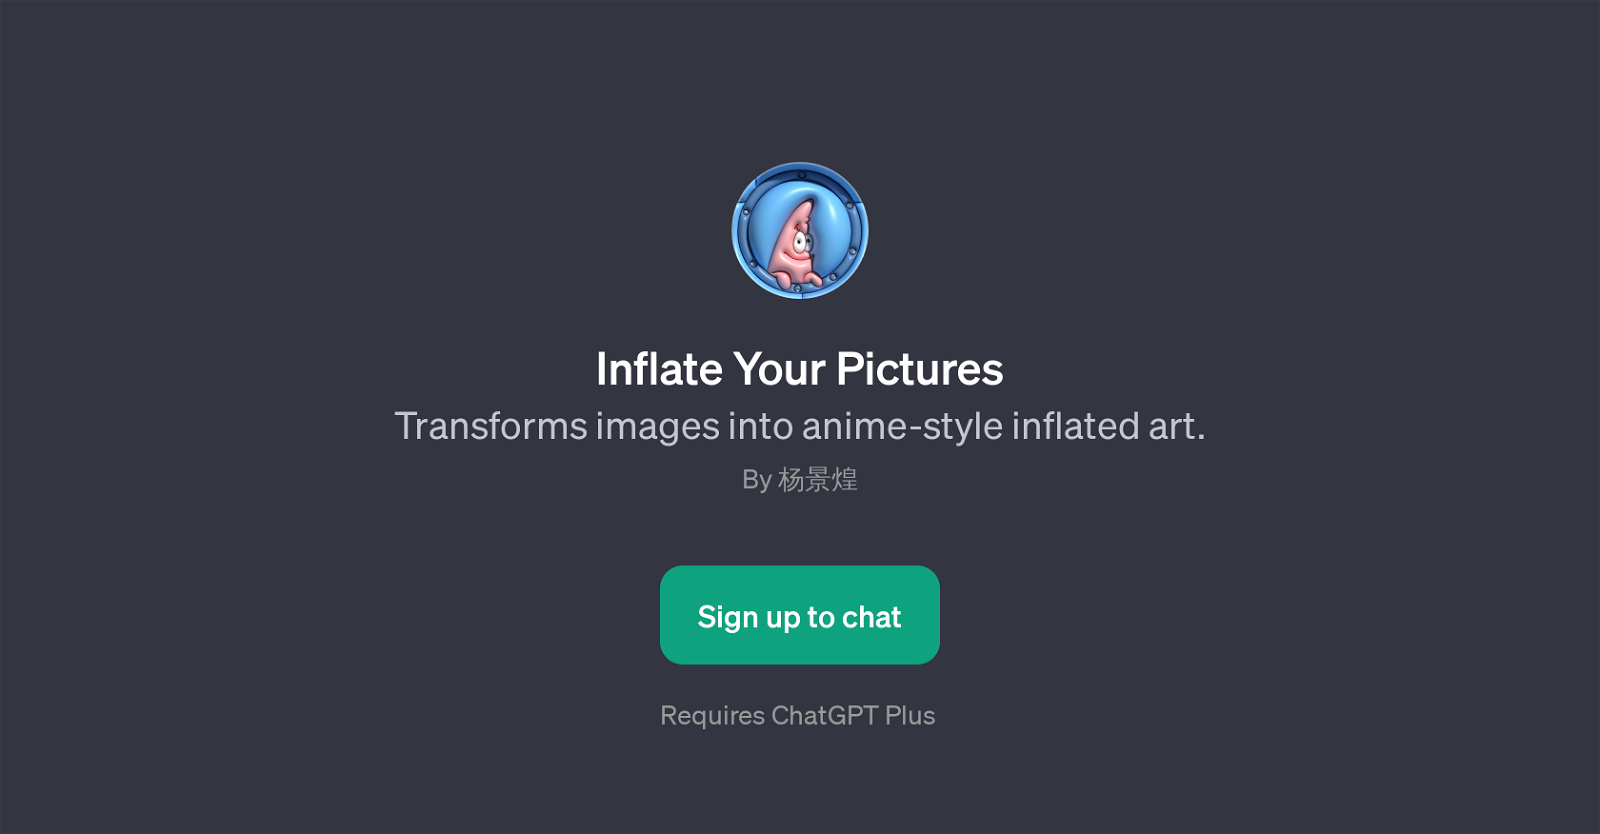 Inflate Your Pictures website